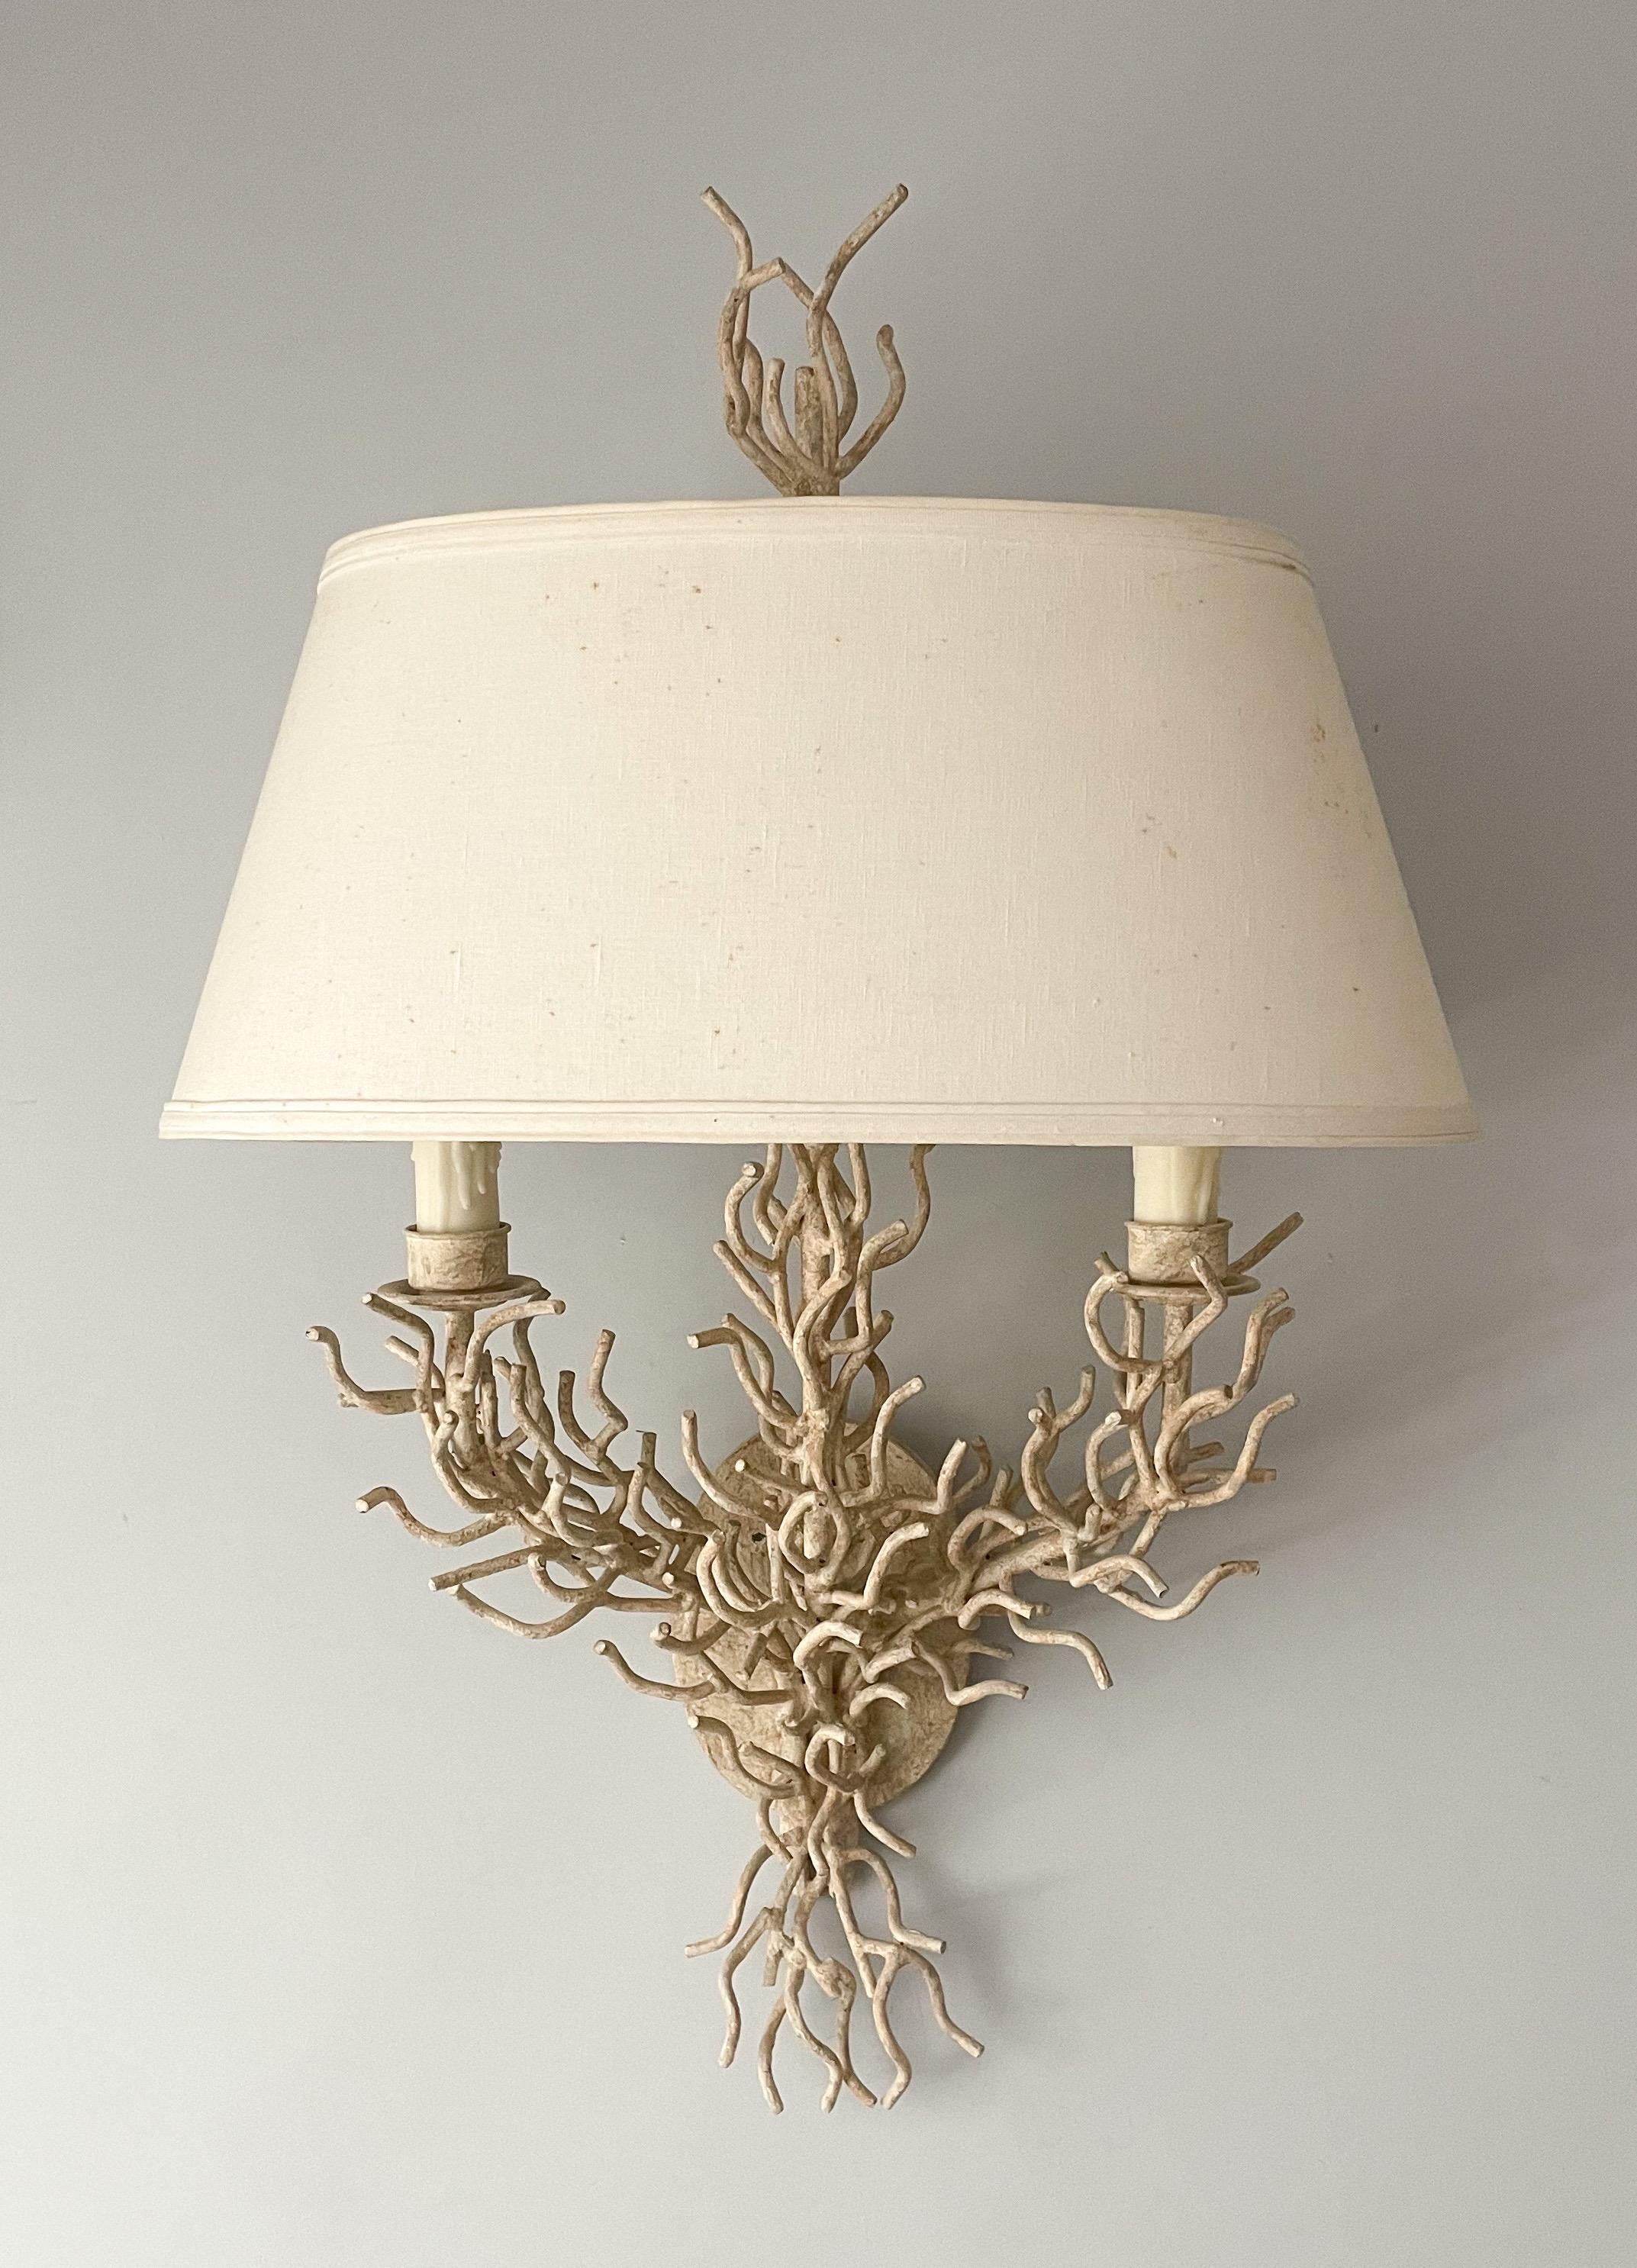 Fabulous, 1970s faux coral sconce with shade.

The sconce consists of a solid wrought iron frame in the form of two coral branches with a textured antiqued white paint finish. Original cloth shade and matching finial are included. The sconce is